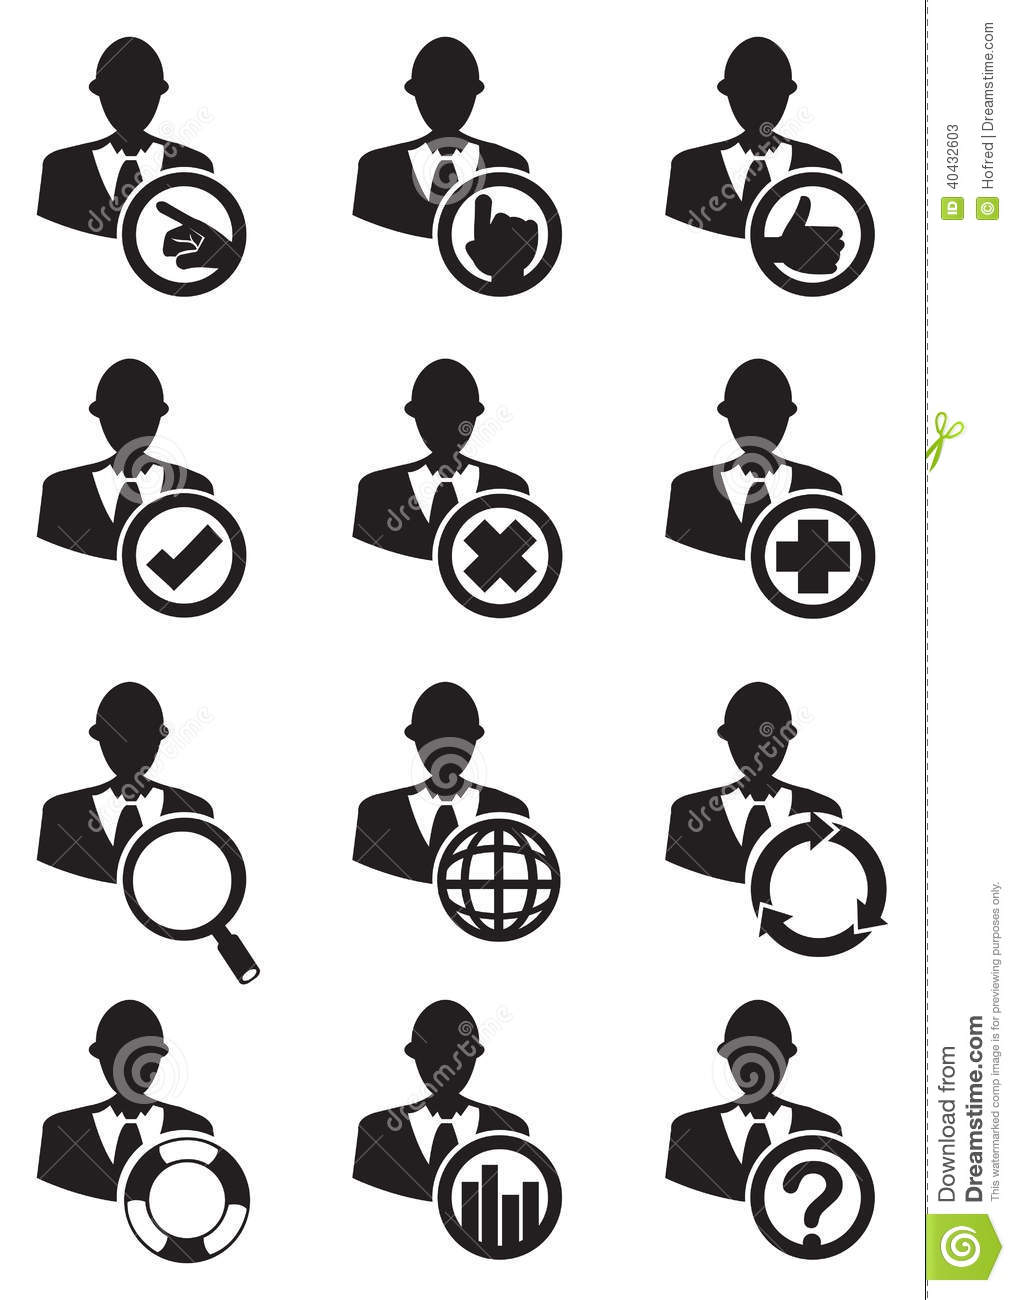 Black and White Business Man Icon